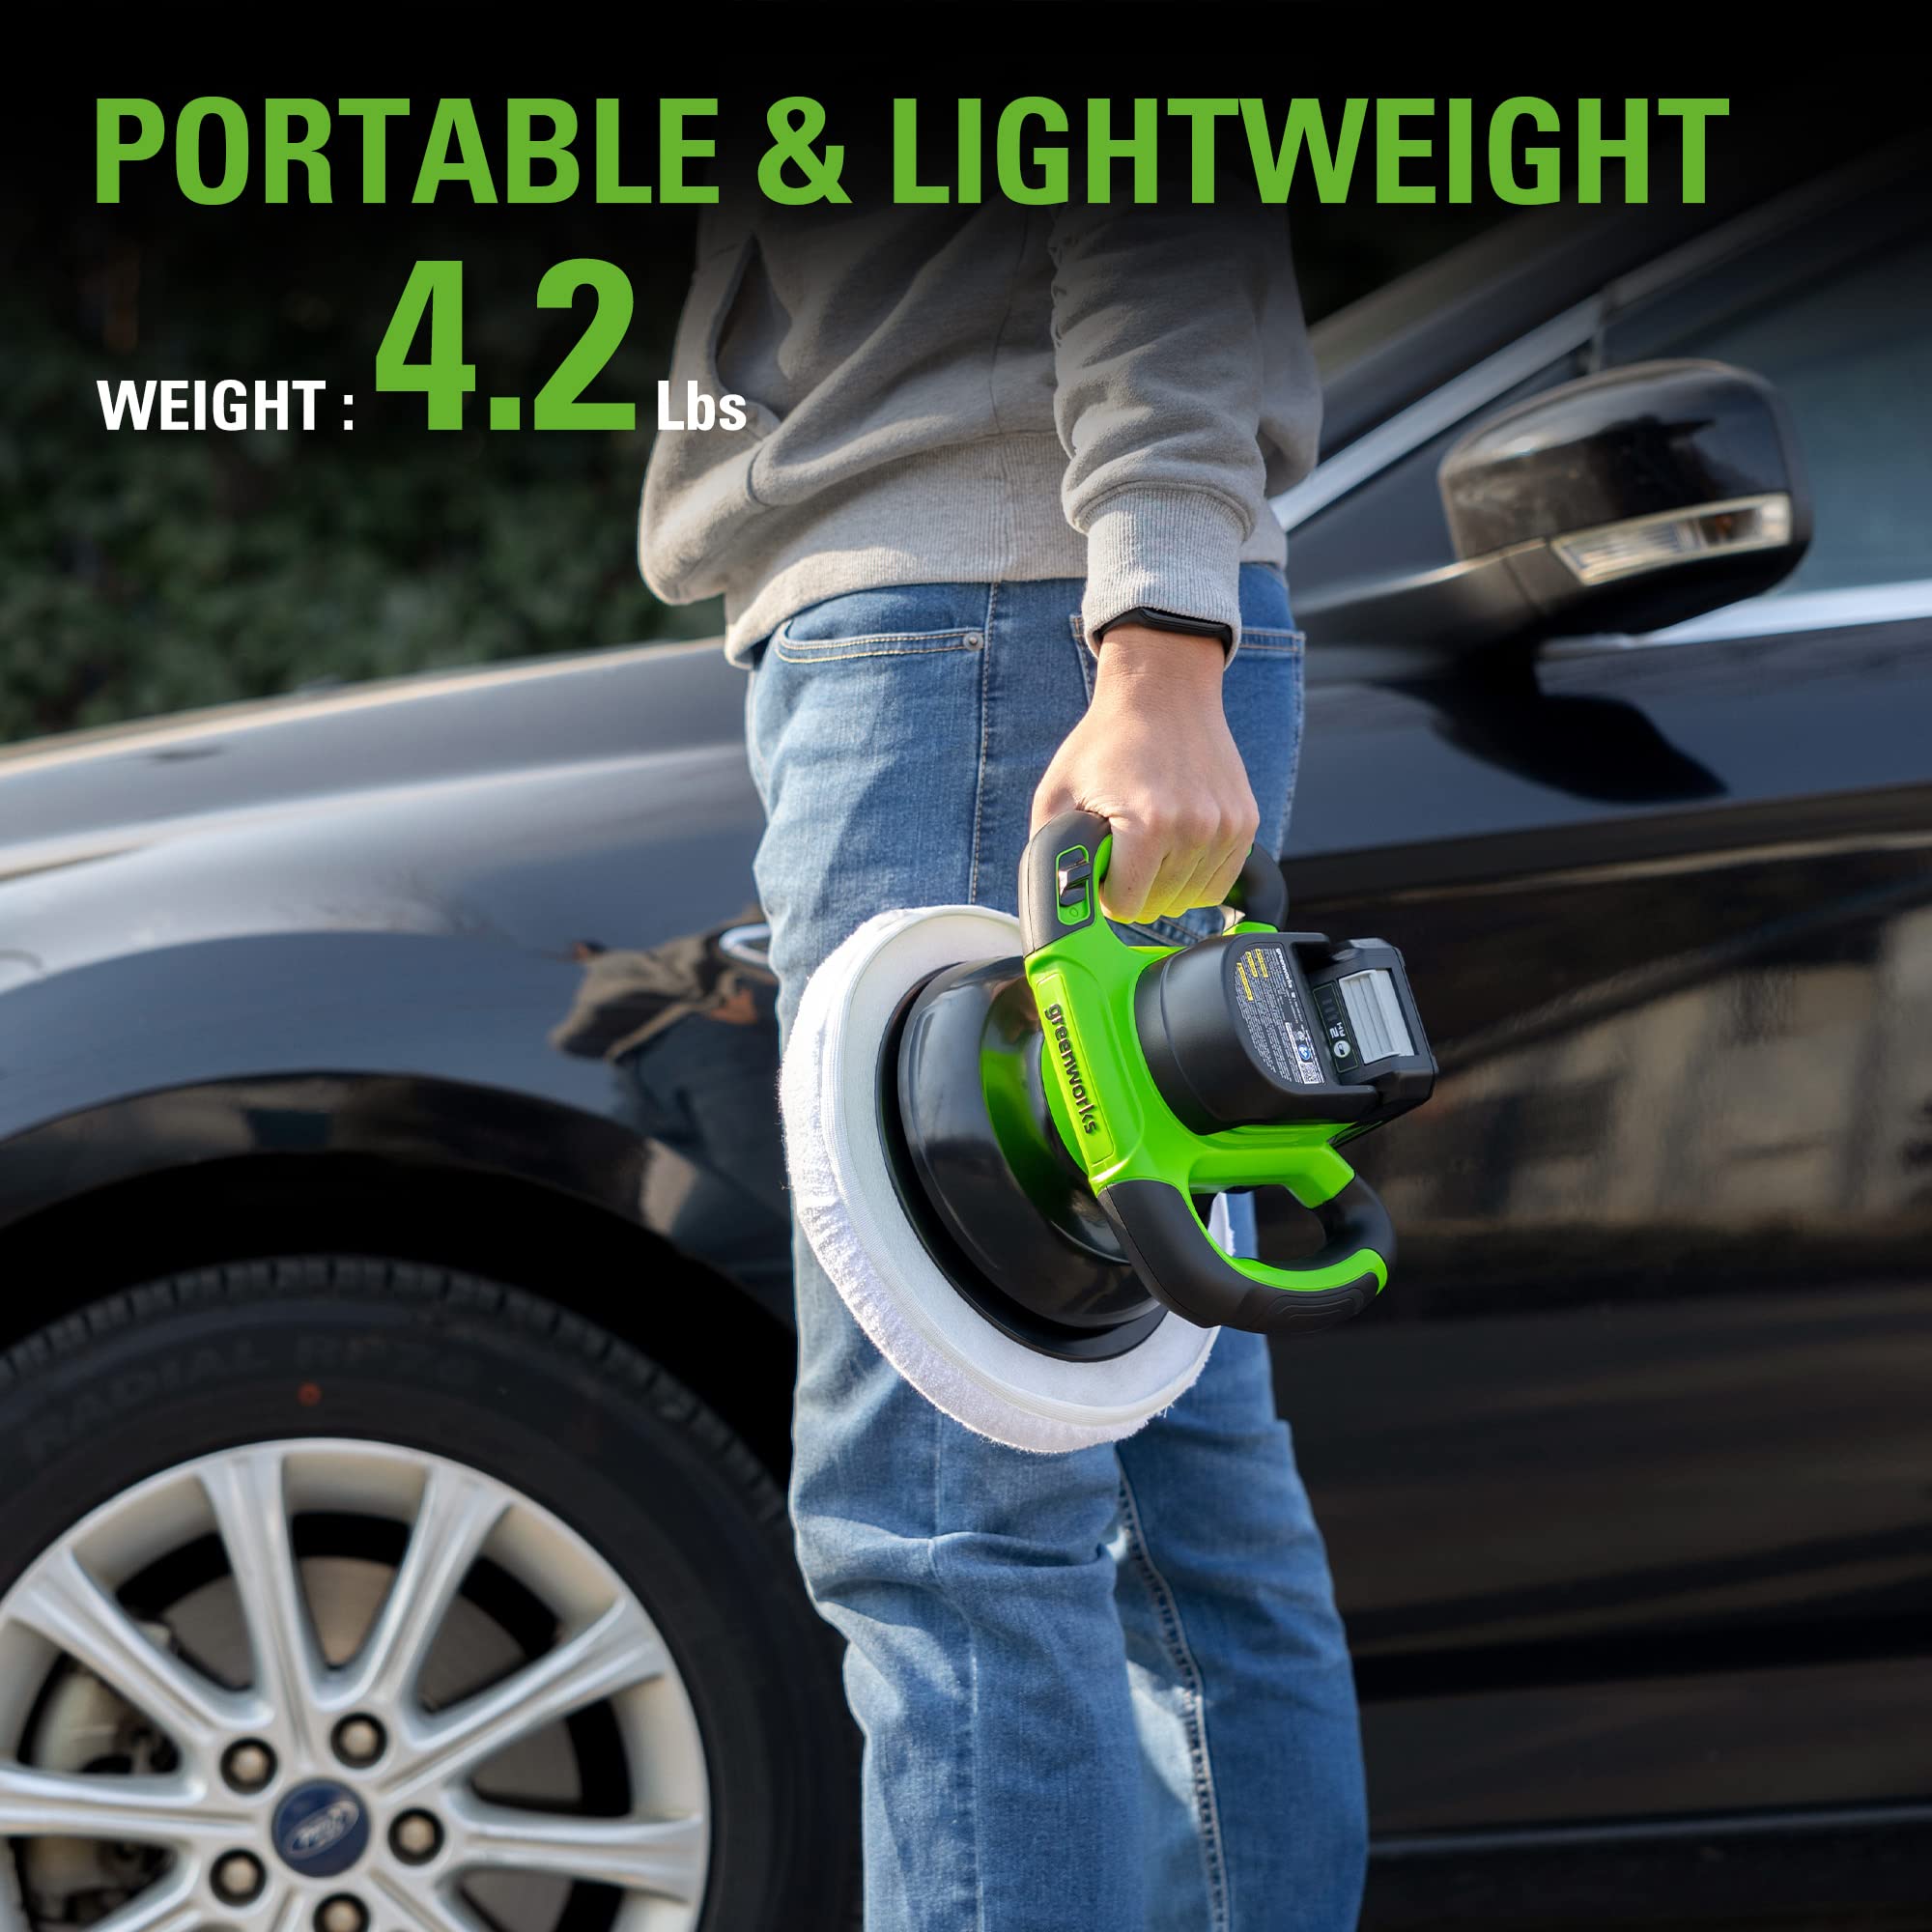 Greenworks 24V Powerful Cordless Car Buffer & Polisher, 10-inch pad 2800 RPM waxing machine with 4 Buffing Bonnets, 2.0Ah Battery & 2A Charger included